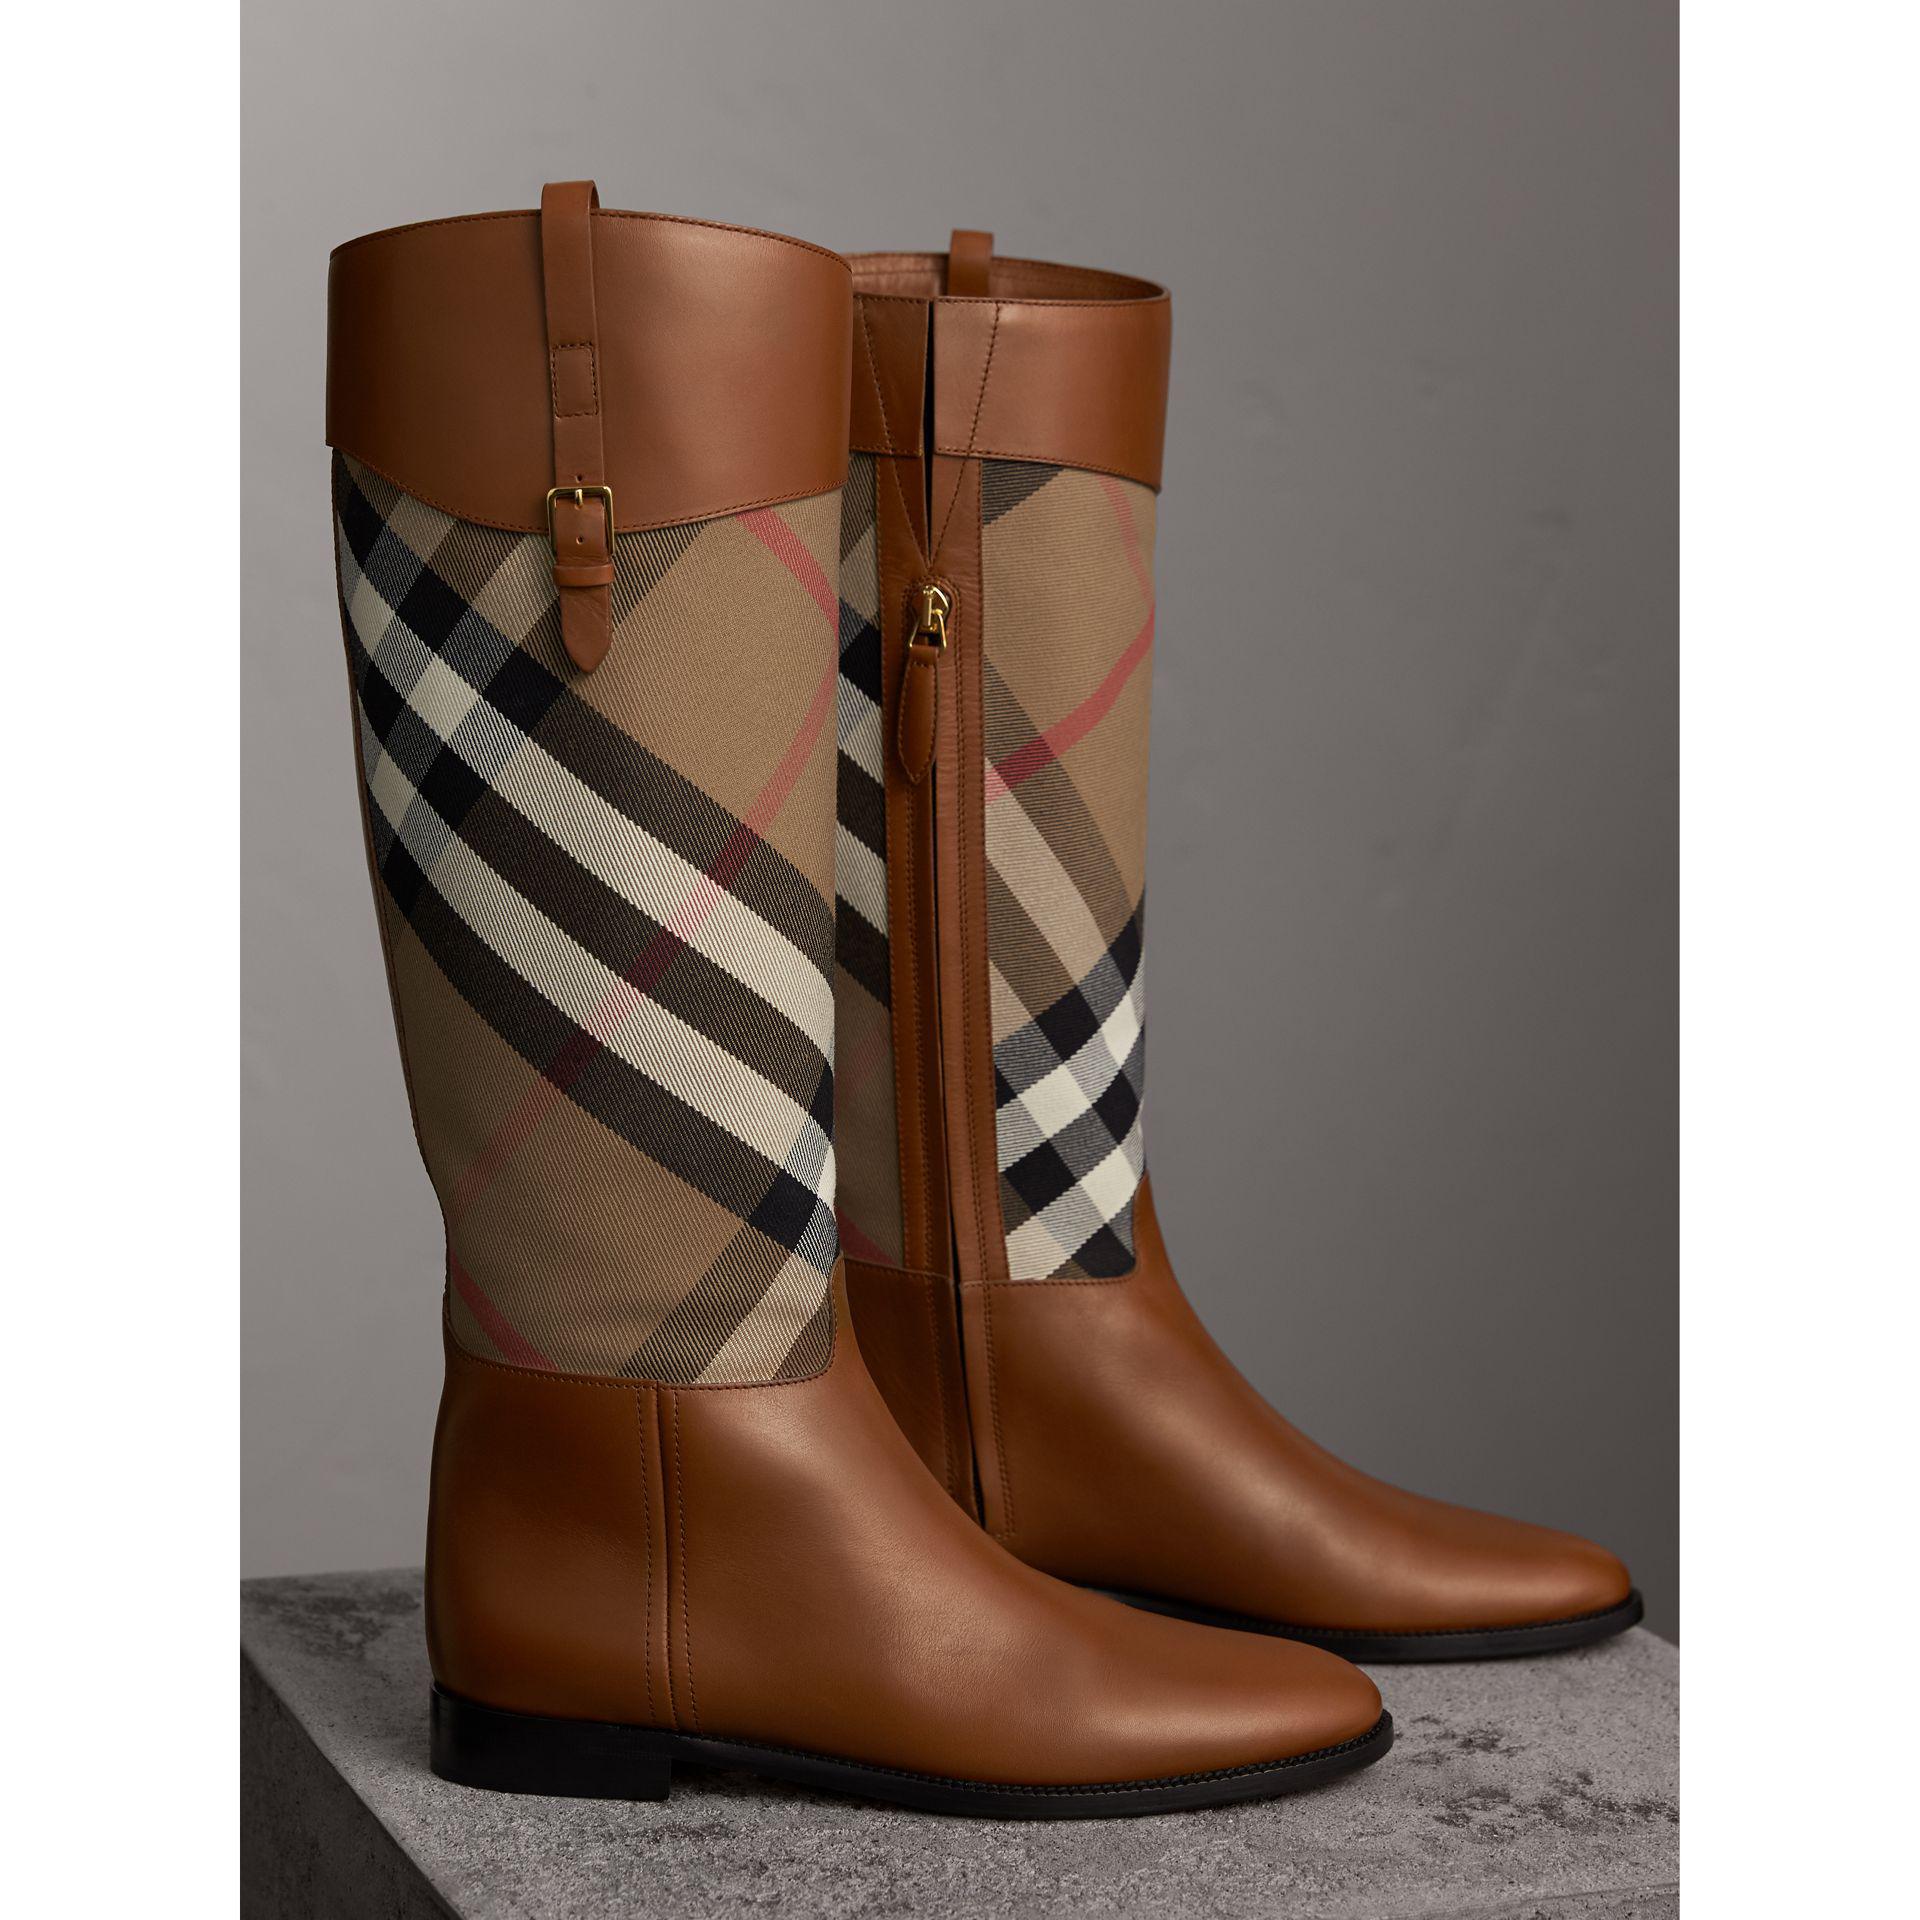 Burberry Boots On Sale Online, SAVE 60% - mpgc.net